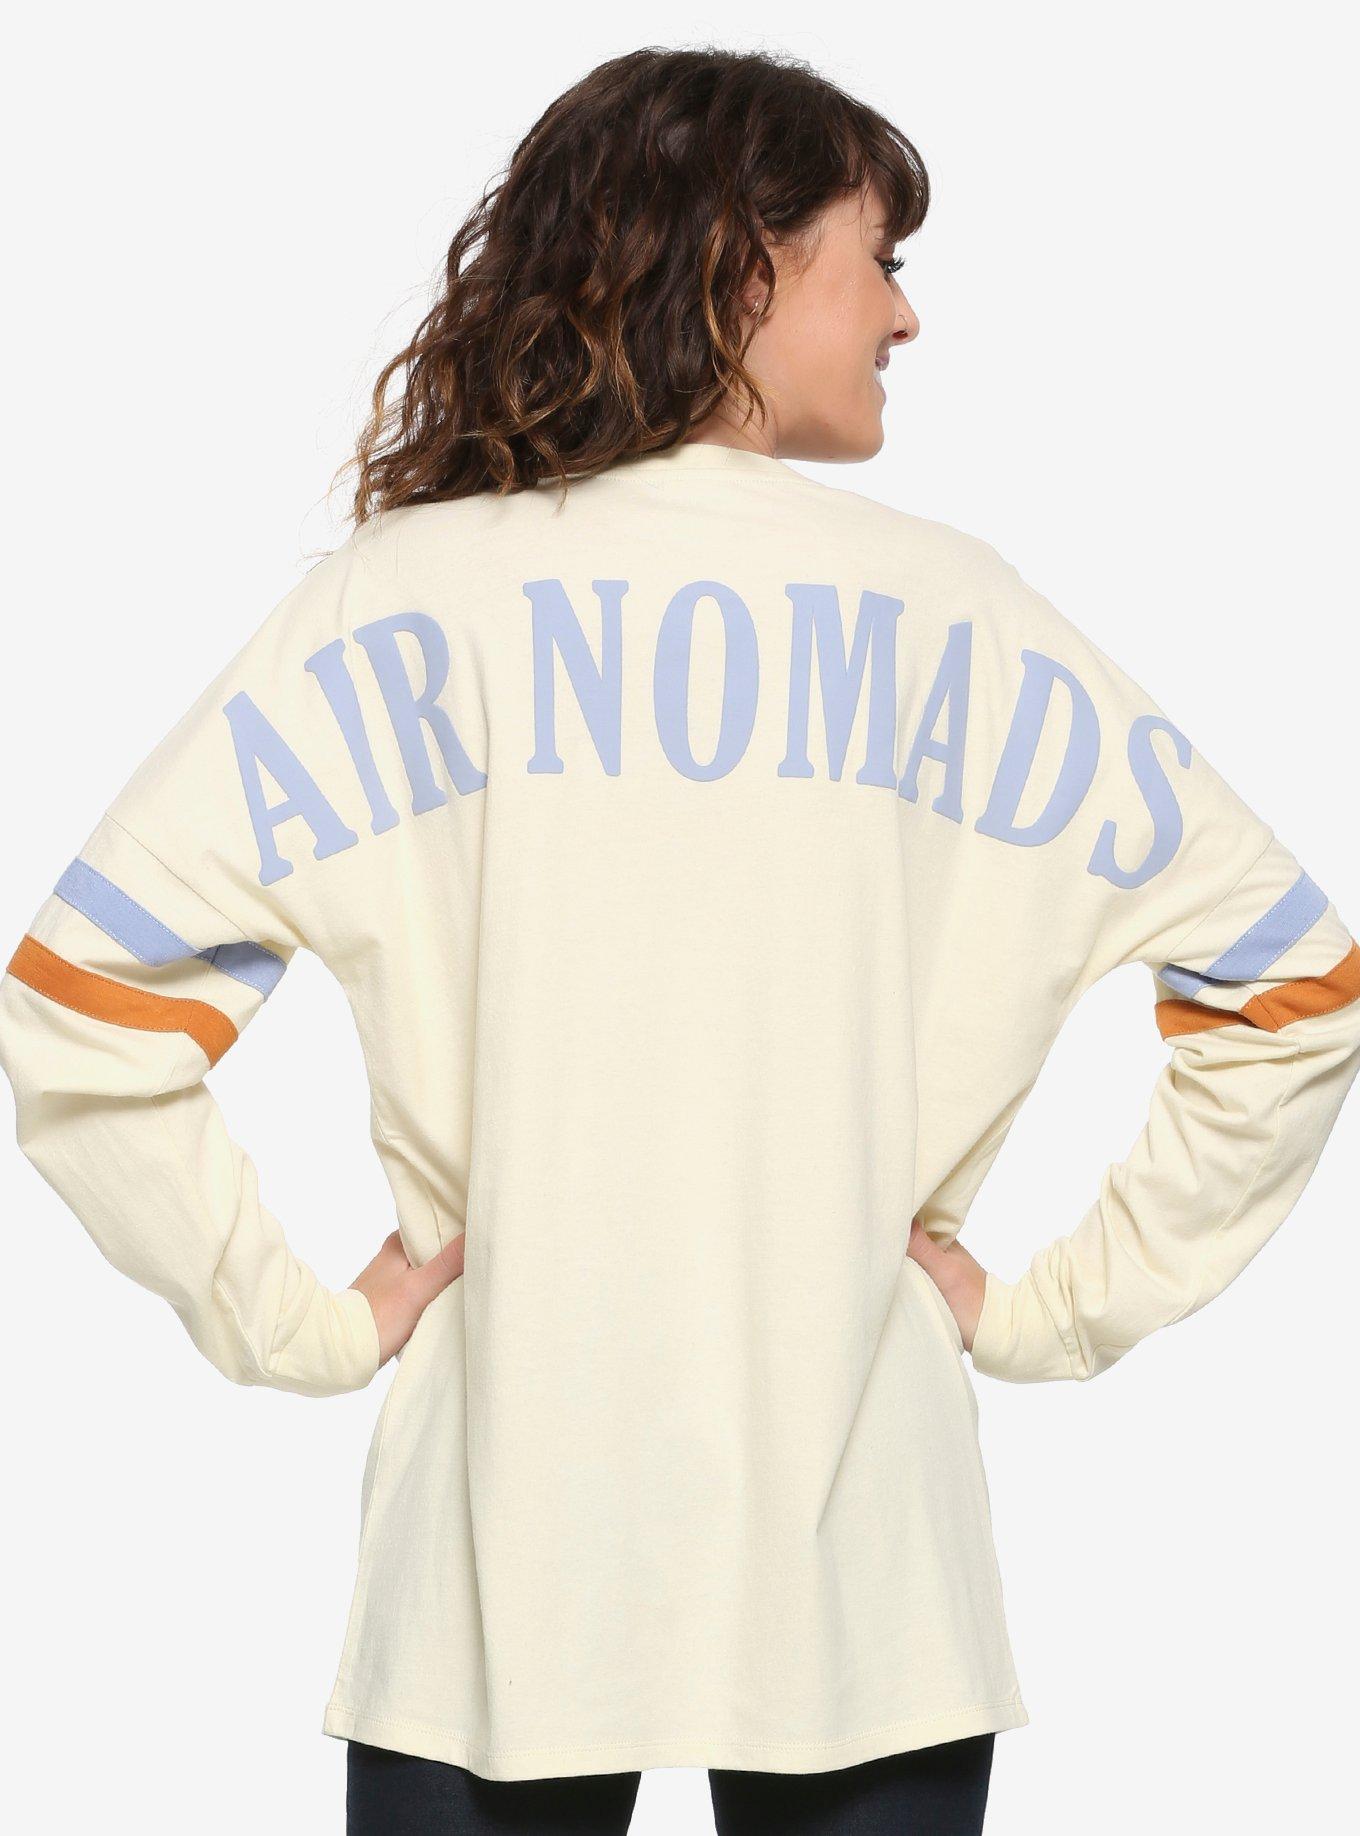 Avatar: The Last Airbender Air Nomads Hype Jersey - BoxLunch Exclusive, , alternate